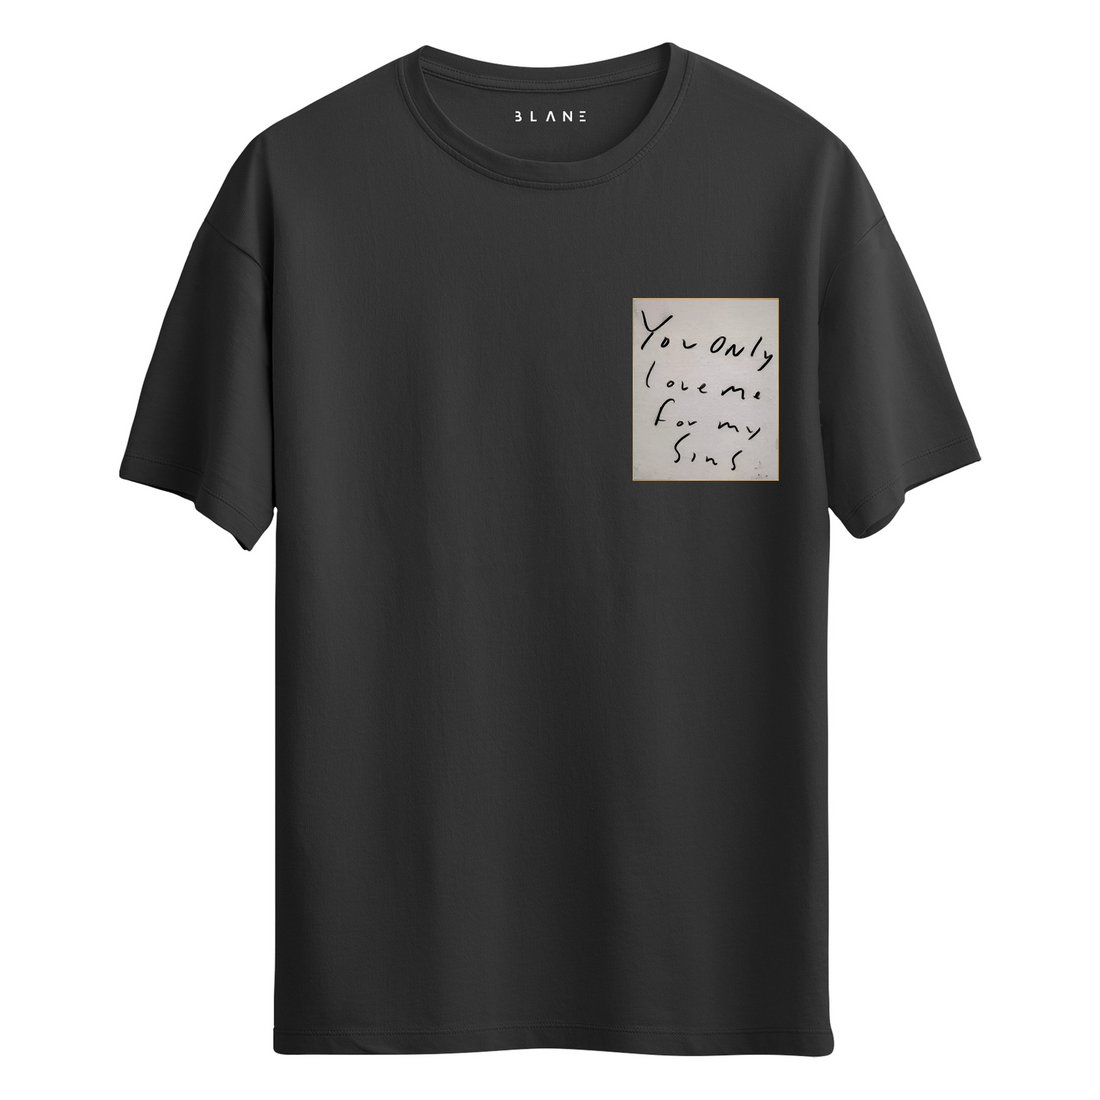 You Only Love Me For My Sins - T-Shirt